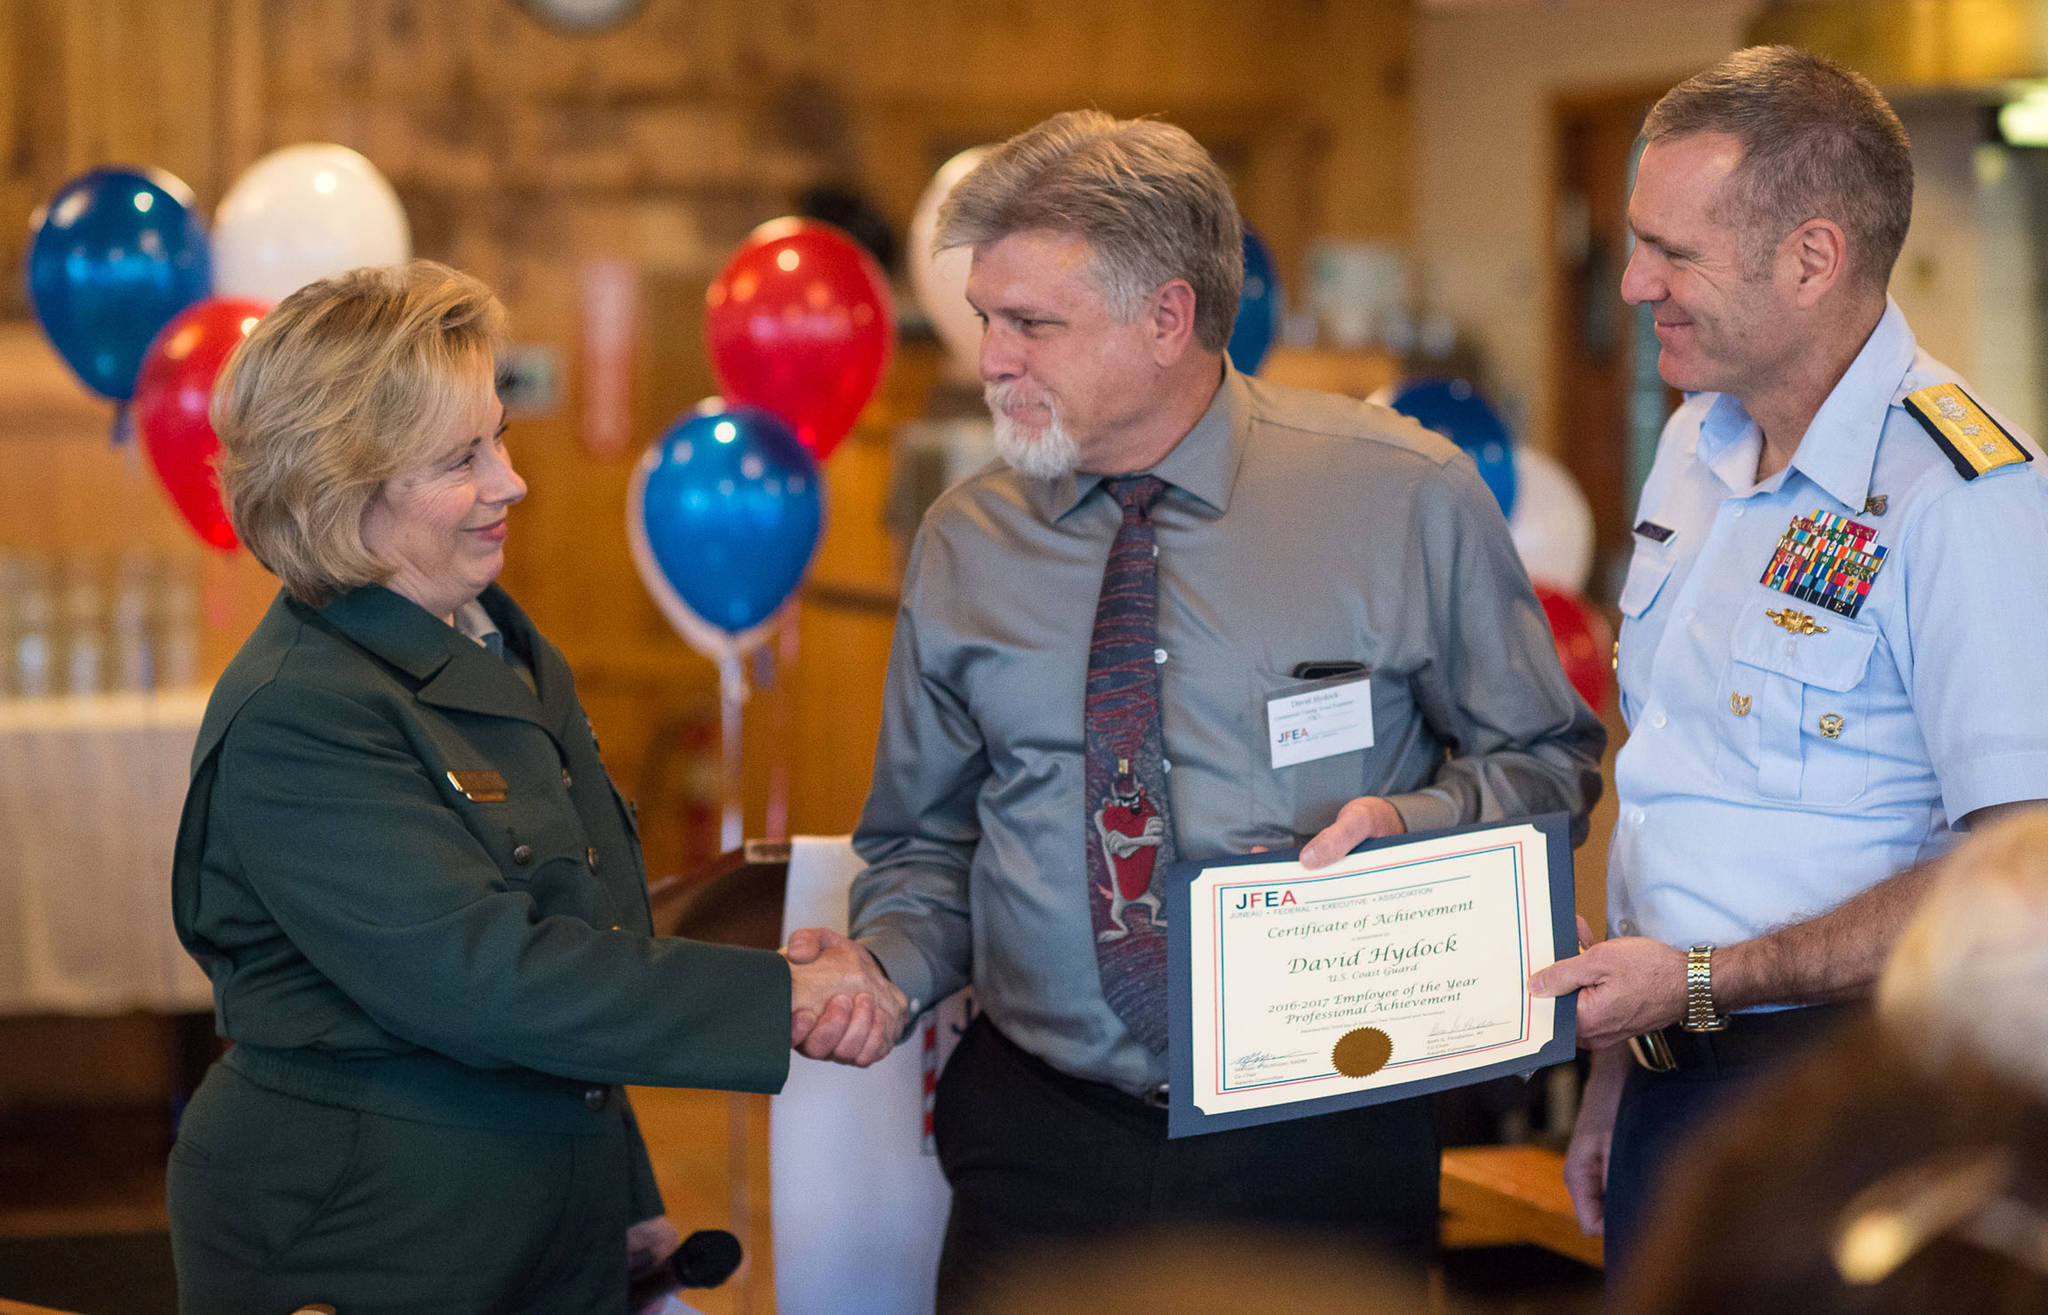 David Hydock, center, is presented with the Professional Achievement Award by Regional Forester Beth Pendleton and Rear Admiral Michael McAllister, Commander of the U.S. Coast Guard’s 17th District, at the Juneau Federal Executive Association’s 2016-2017 Federal Employee of the Year Award Banquet and Ceremony at the Twisted Fish on Tuesday, Oct. 3, 2017. (Michael Penn | Juneau Empire)